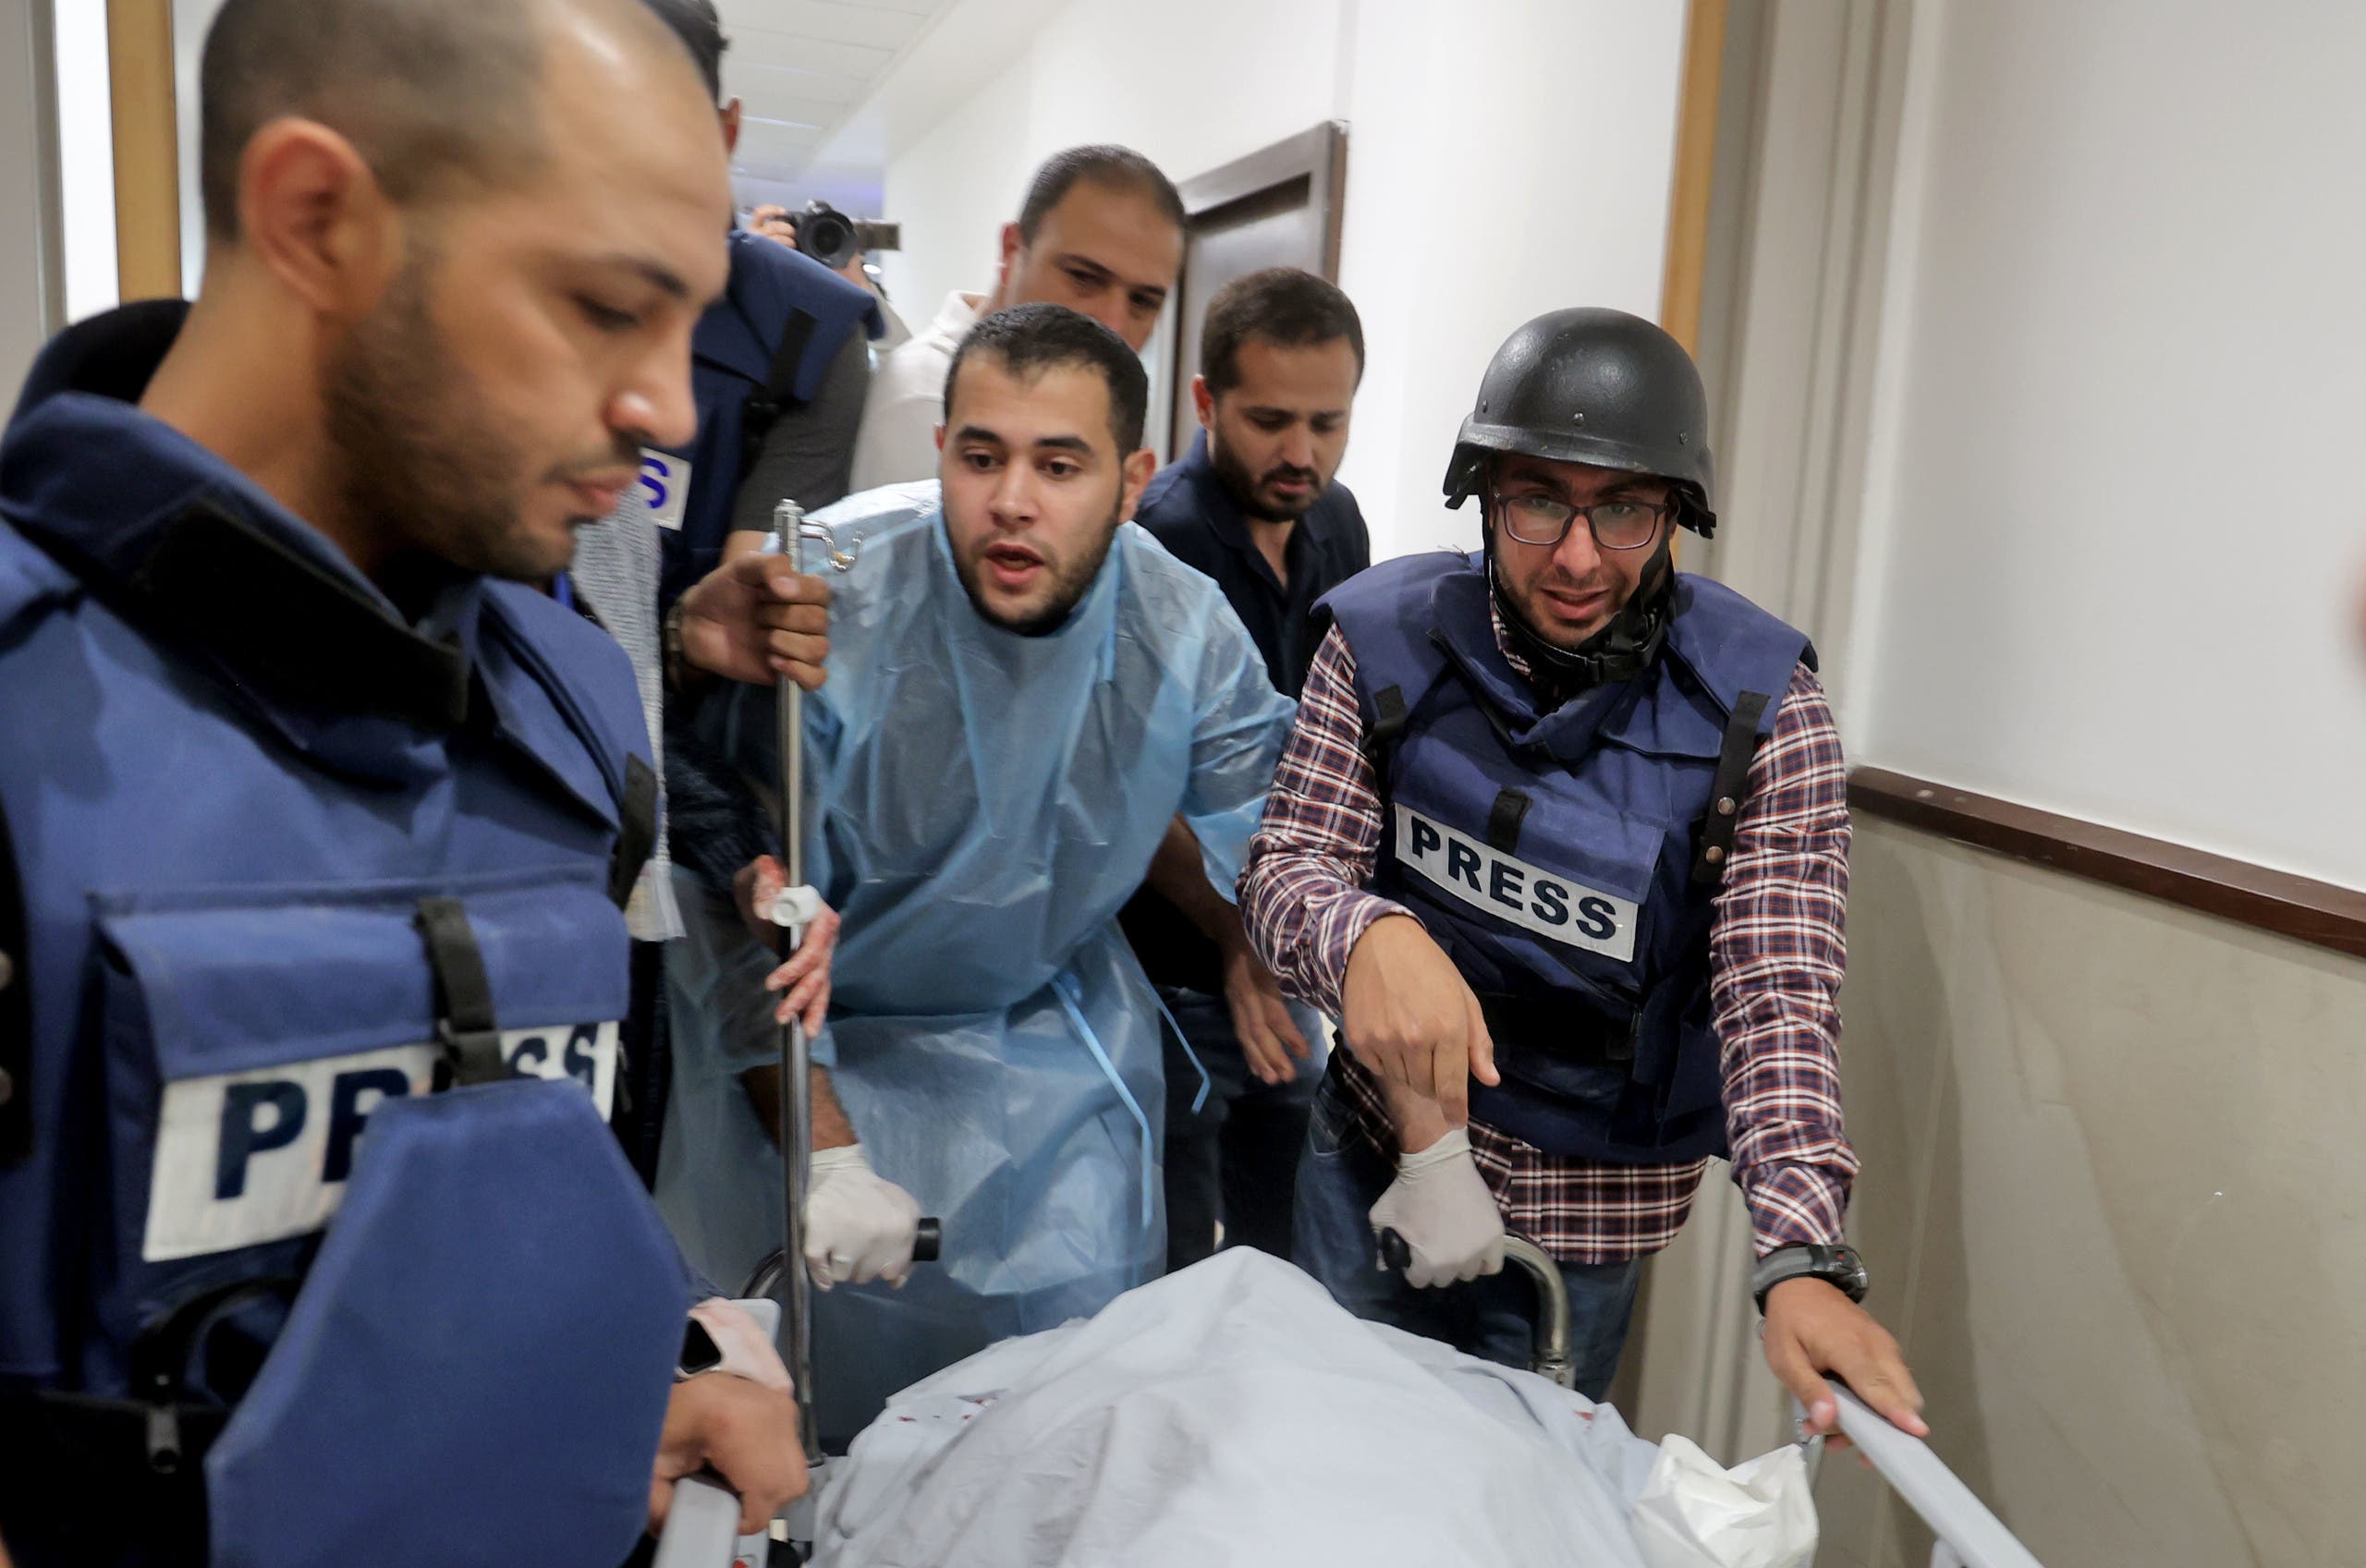 Journalists escort the body of veteran Al Jazeera journalist Shireen Abu Aqleh, who was shot dead by Israeli troops as she covered a raid on the West Bank's Jenin refugee camp on May 11, 2022, at the hospital in Jenin. (AFP)